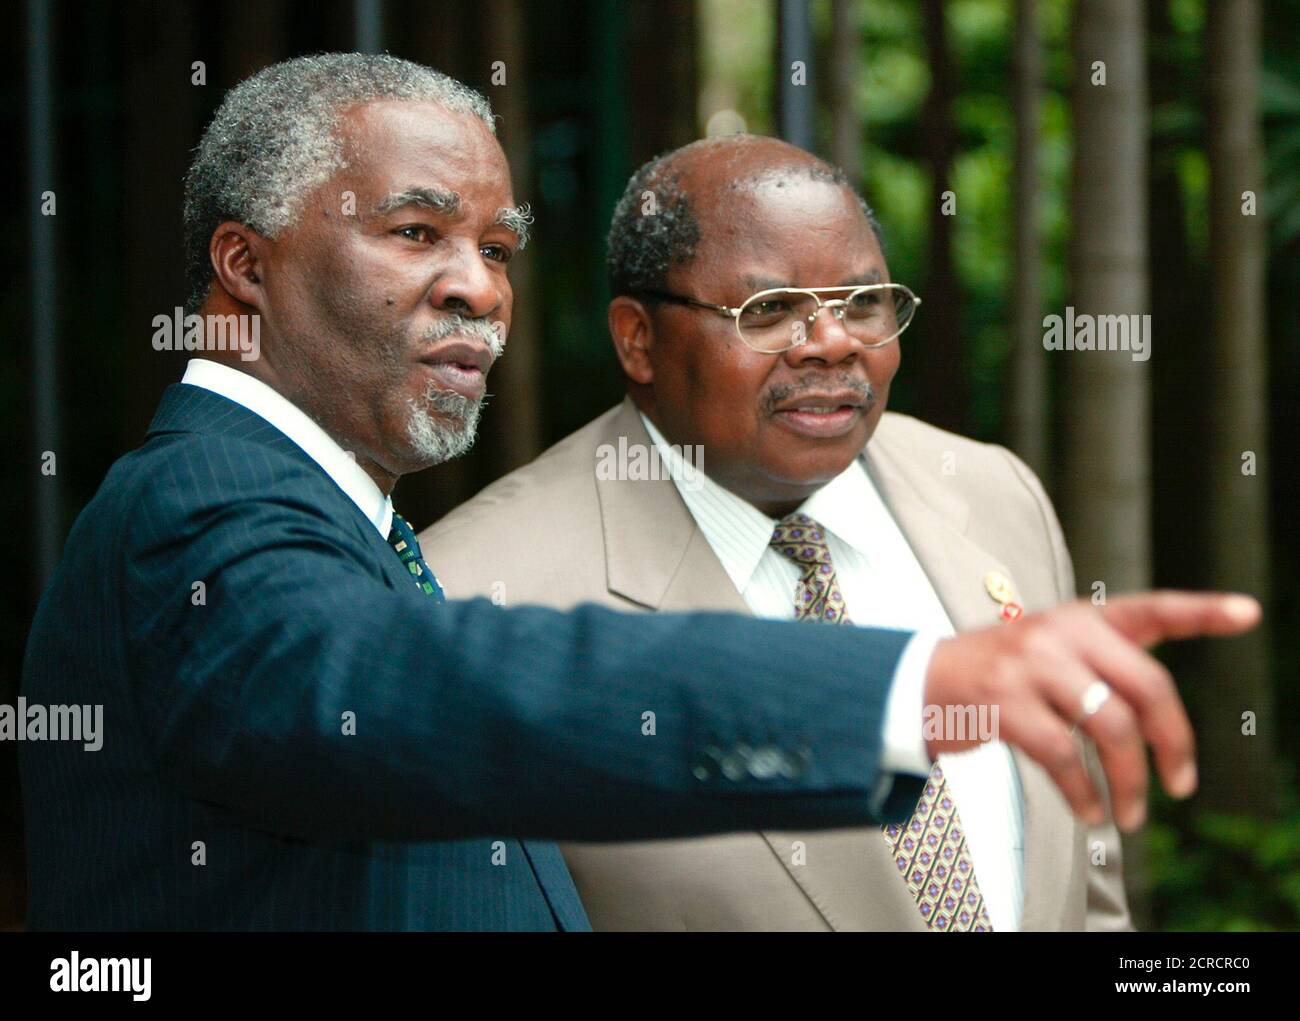 South Africa's President Thabo Mbeki gestures while talking to Tanzania's Benjamin Mkapa at the Commonwealth Heads of Government Meeting in Coolum March 3, 2002. Leaders from Commonwealth nations around the globe have gathered in Australia for the 35th biennial summit. REUTERS/Torsten Blackwood/Pool  MDB/JD Stock Photo